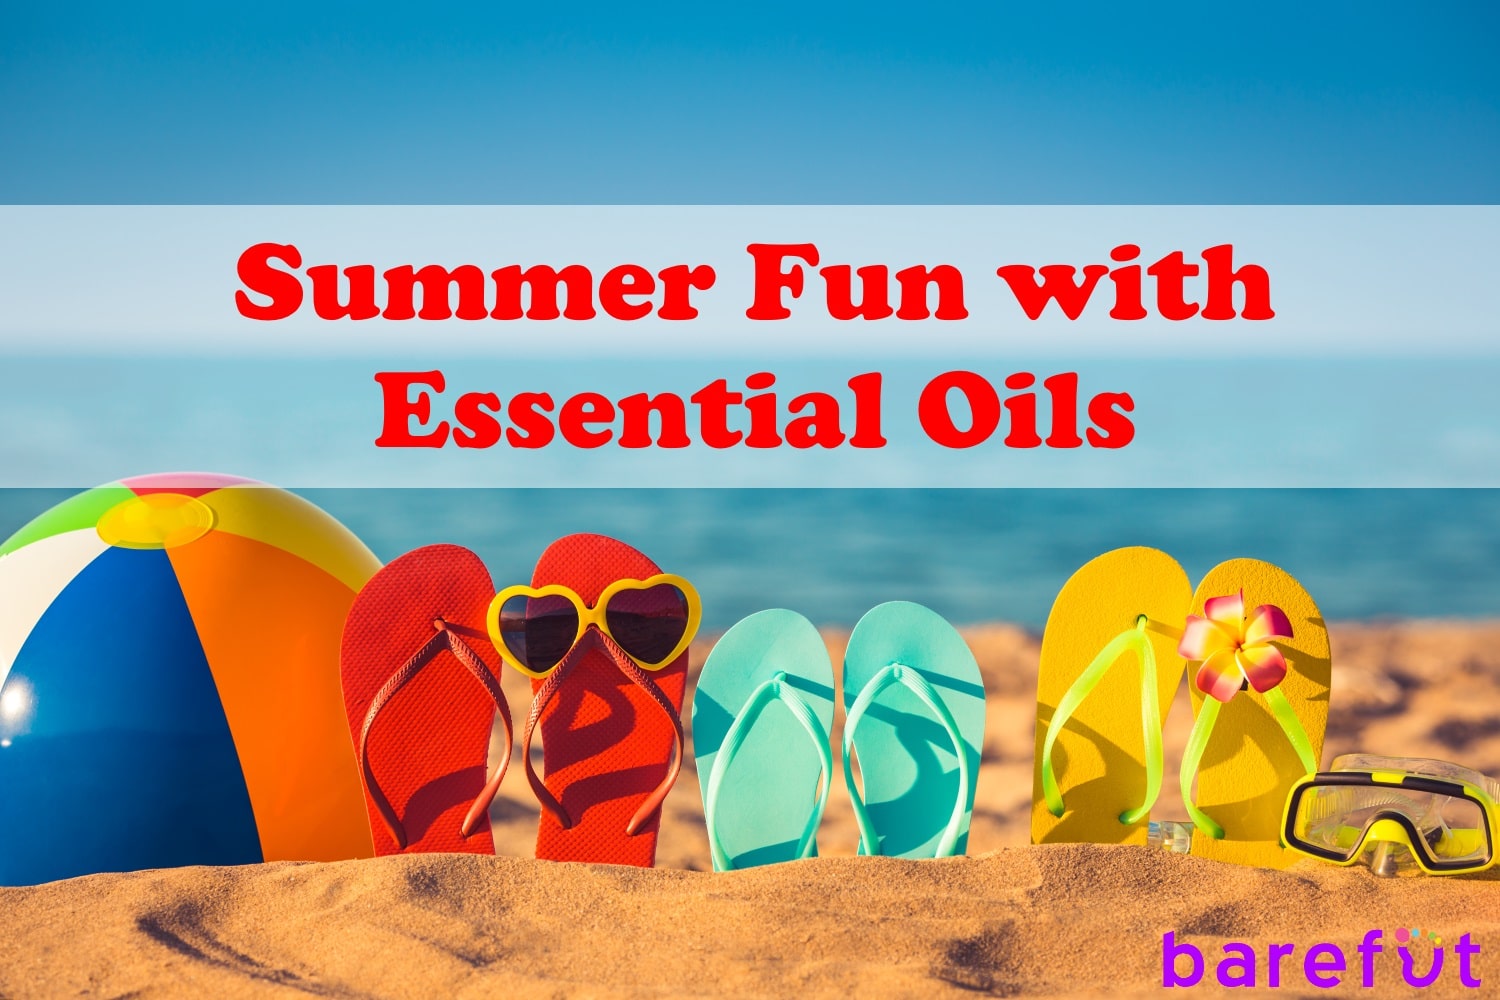 Summer Fun with Essential Oils